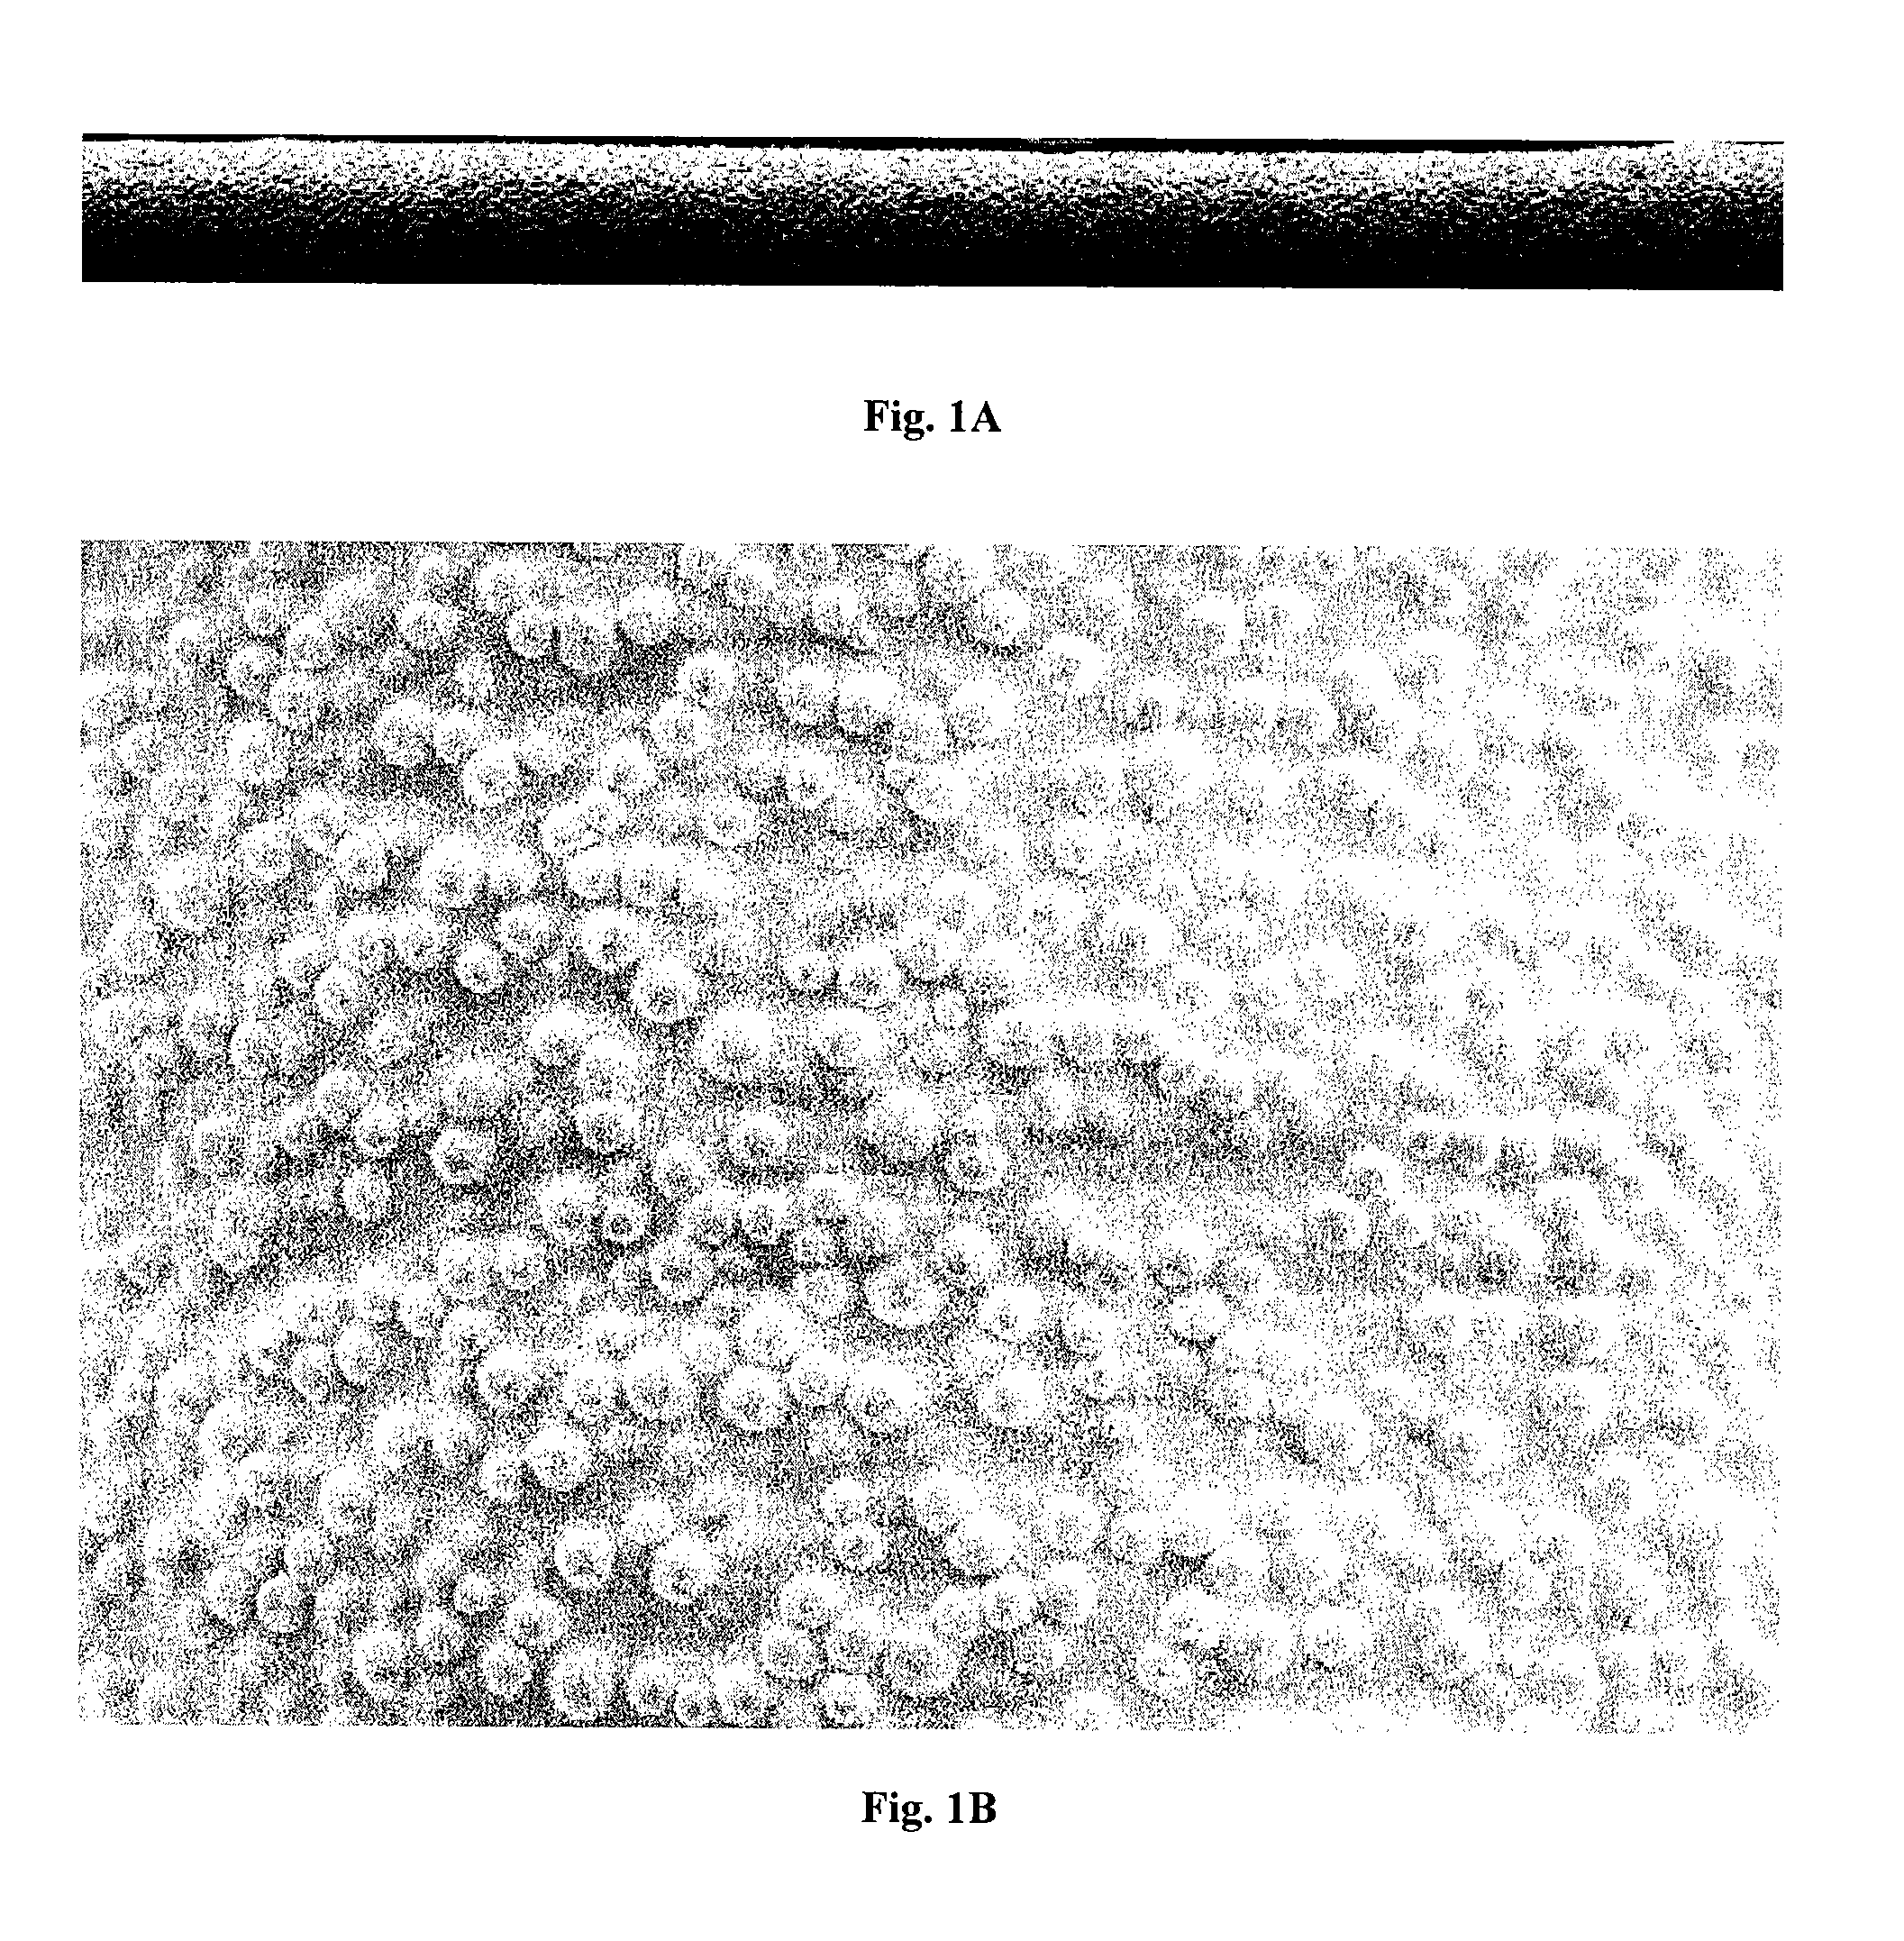 Biocompatible solid-phase microextraction coatings and methods for their preparation